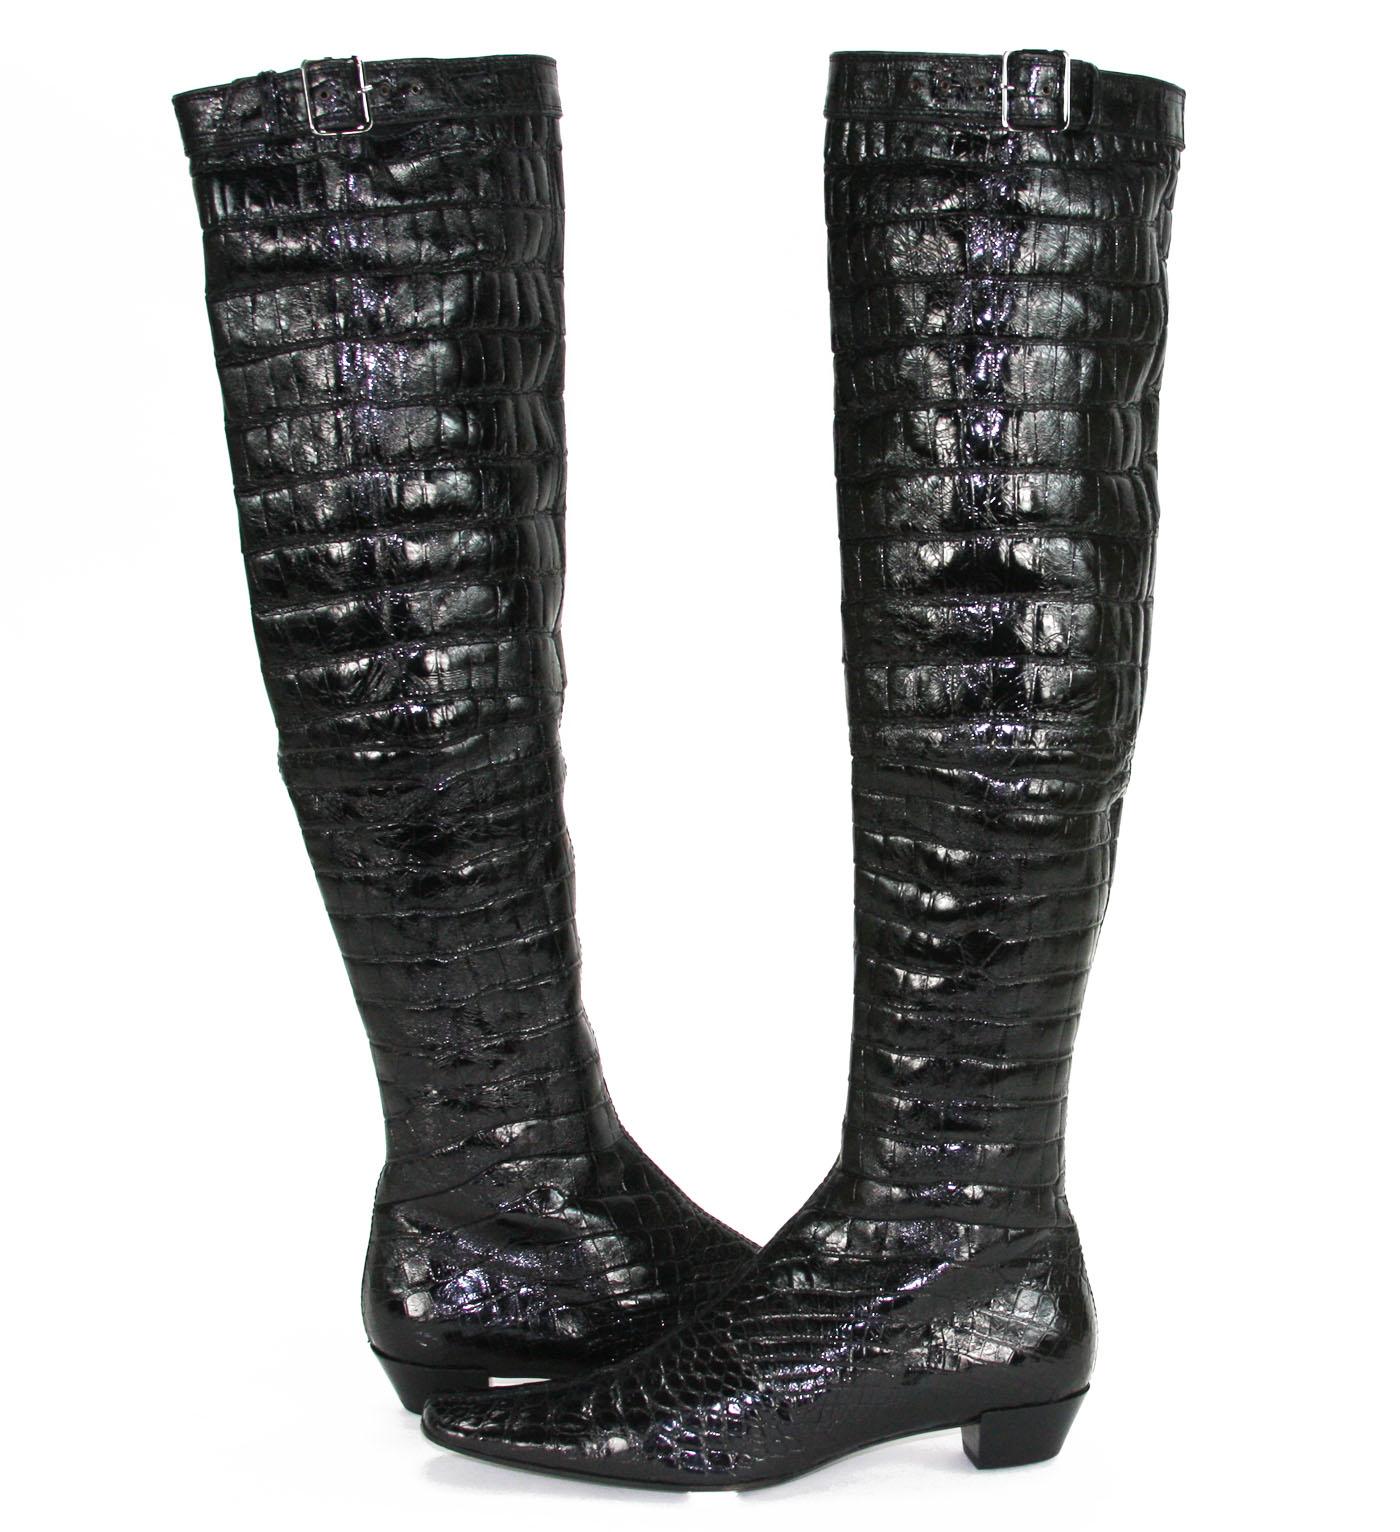 Tom Ford for Gucci Black Alligator Soft & Shiny Skin Over the Knee Boots
Fall / Winter 2001 Collection
Designer size 39 C 
A Truly Luxuries and Elegant Boots, Amazing Exotic Leather - Full Belly Alligator Pieces
Adjustable Buckle at the Top, Soft